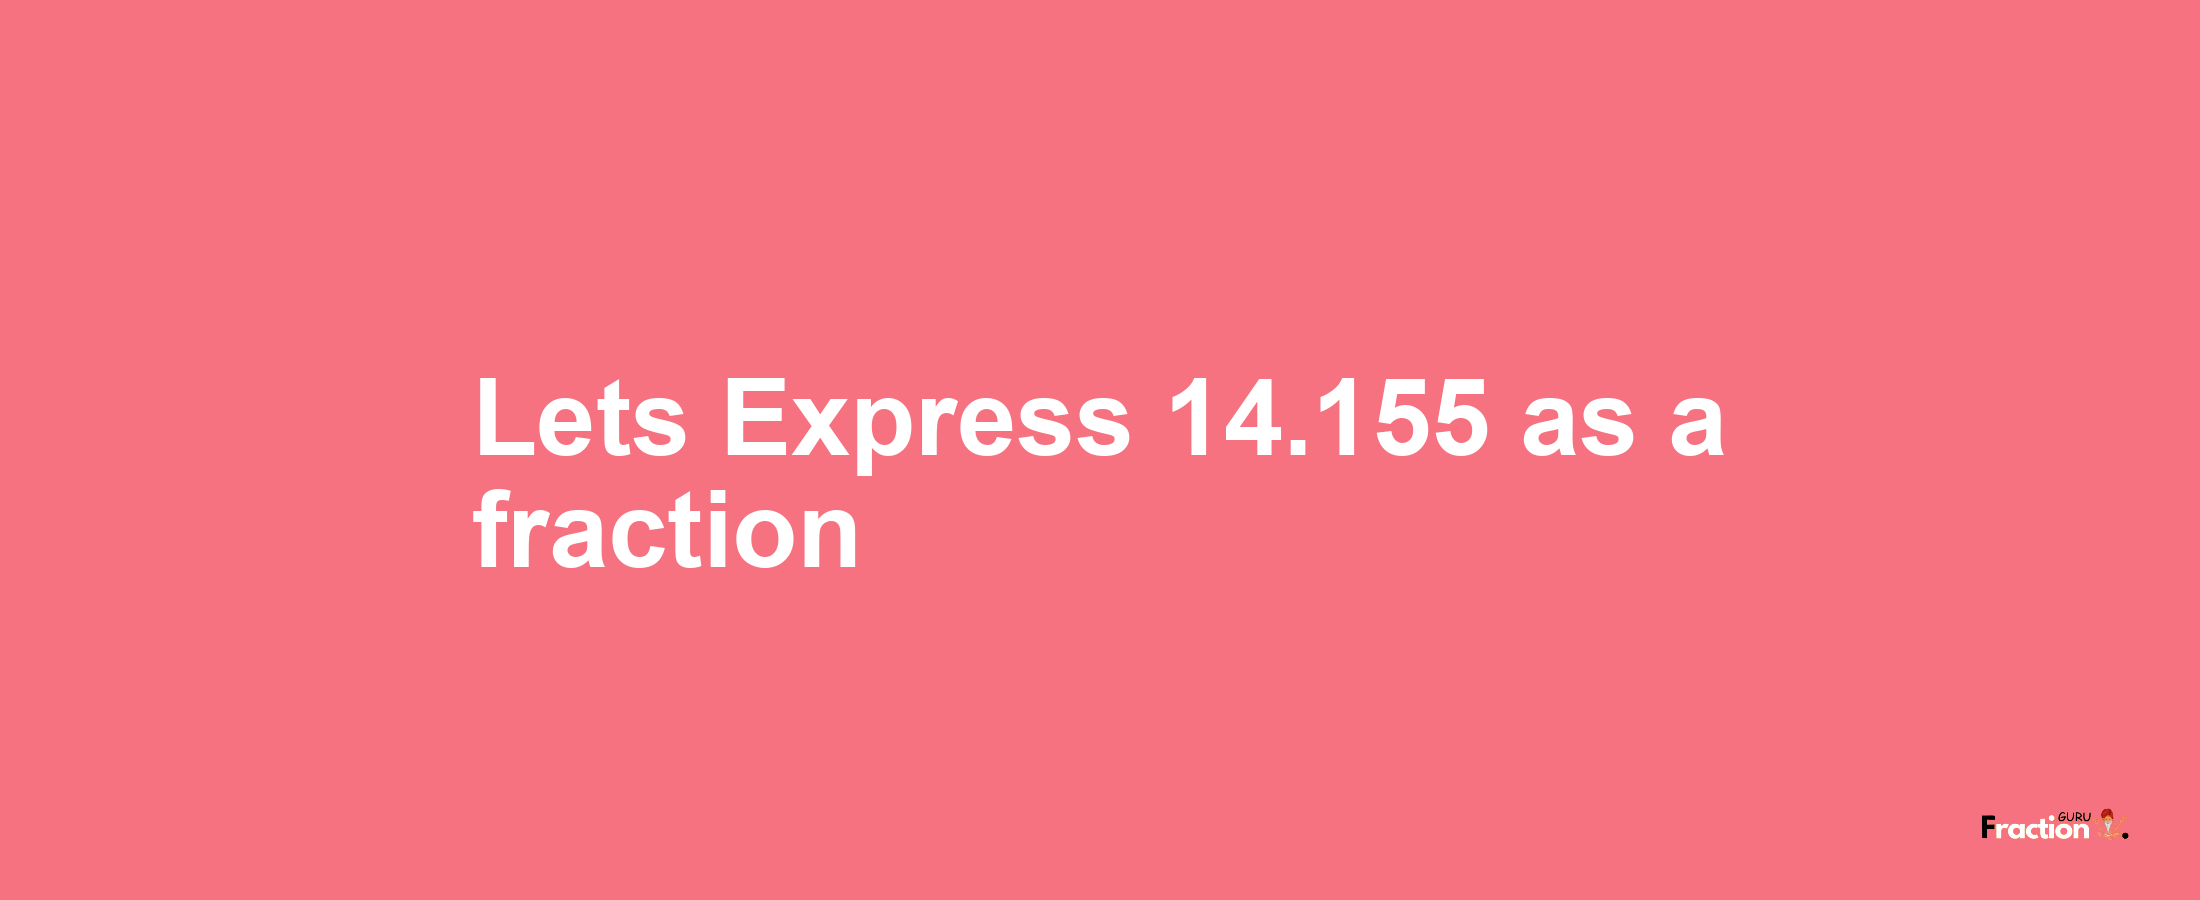 Lets Express 14.155 as afraction